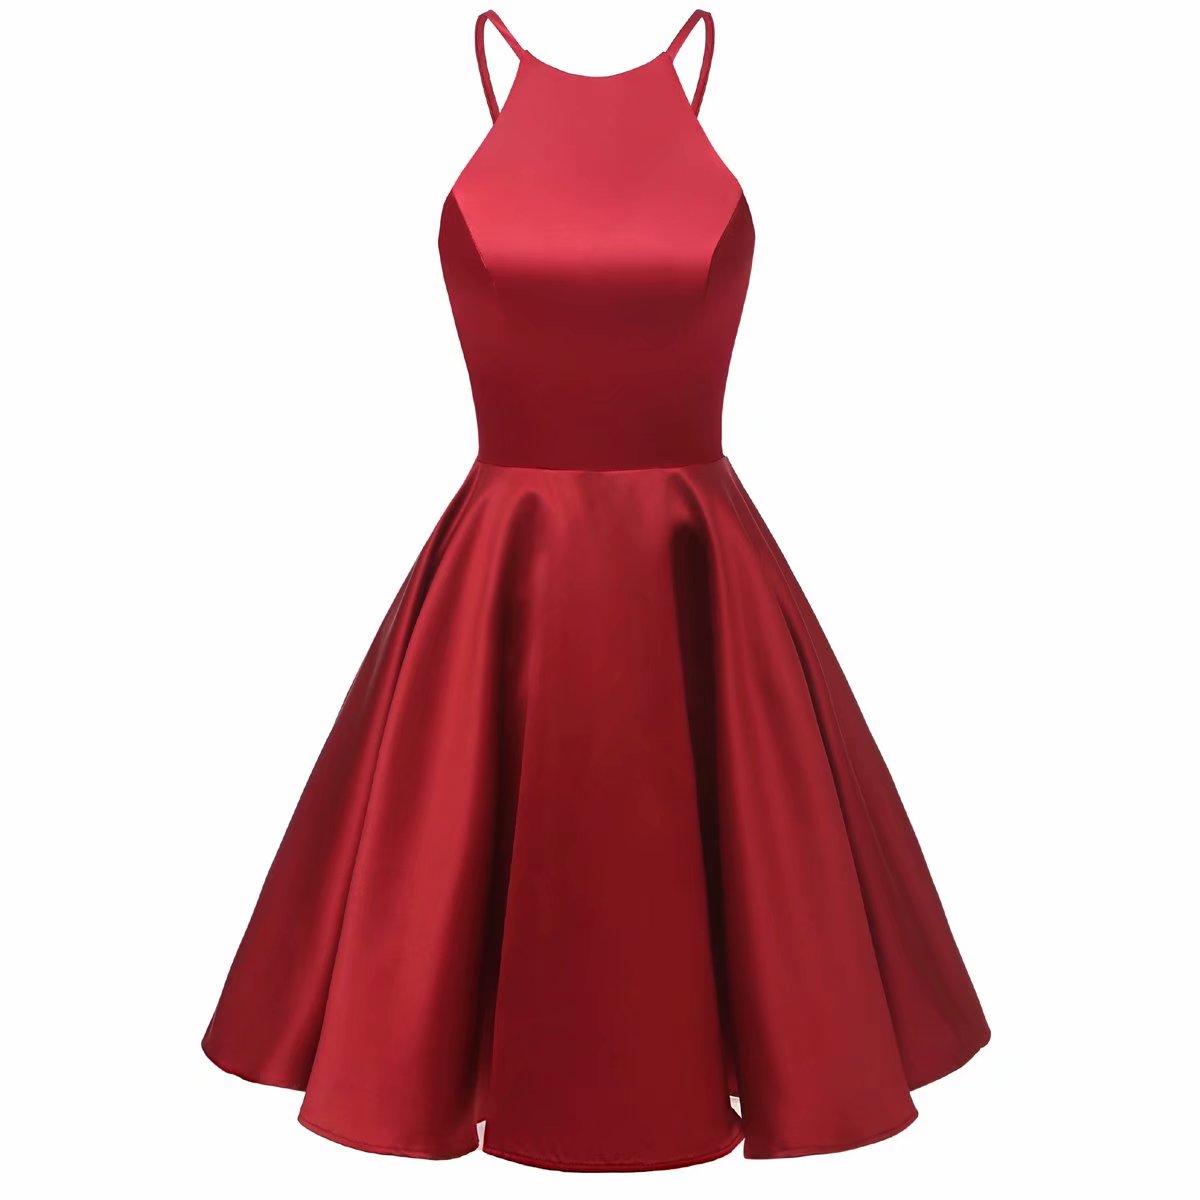 2019 Mini Prom Gowns Short Burgundy Homecoming Dresses Prom Party Evening Cocktail Gown Bridesmaid Dresses